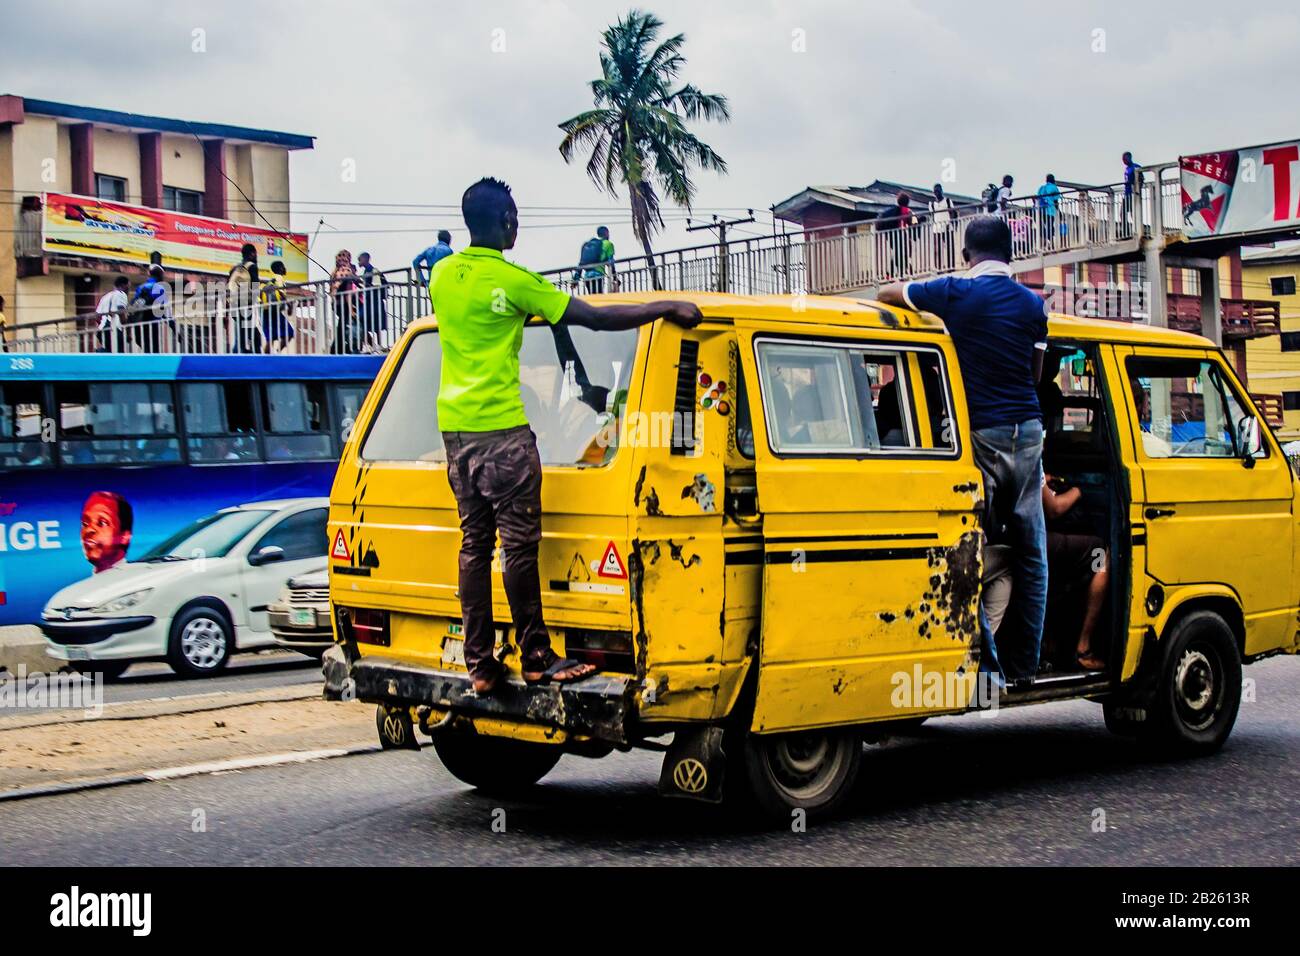 People hang of a bus (danfo) on a street in Lagos, Nigeria. Stock Photo